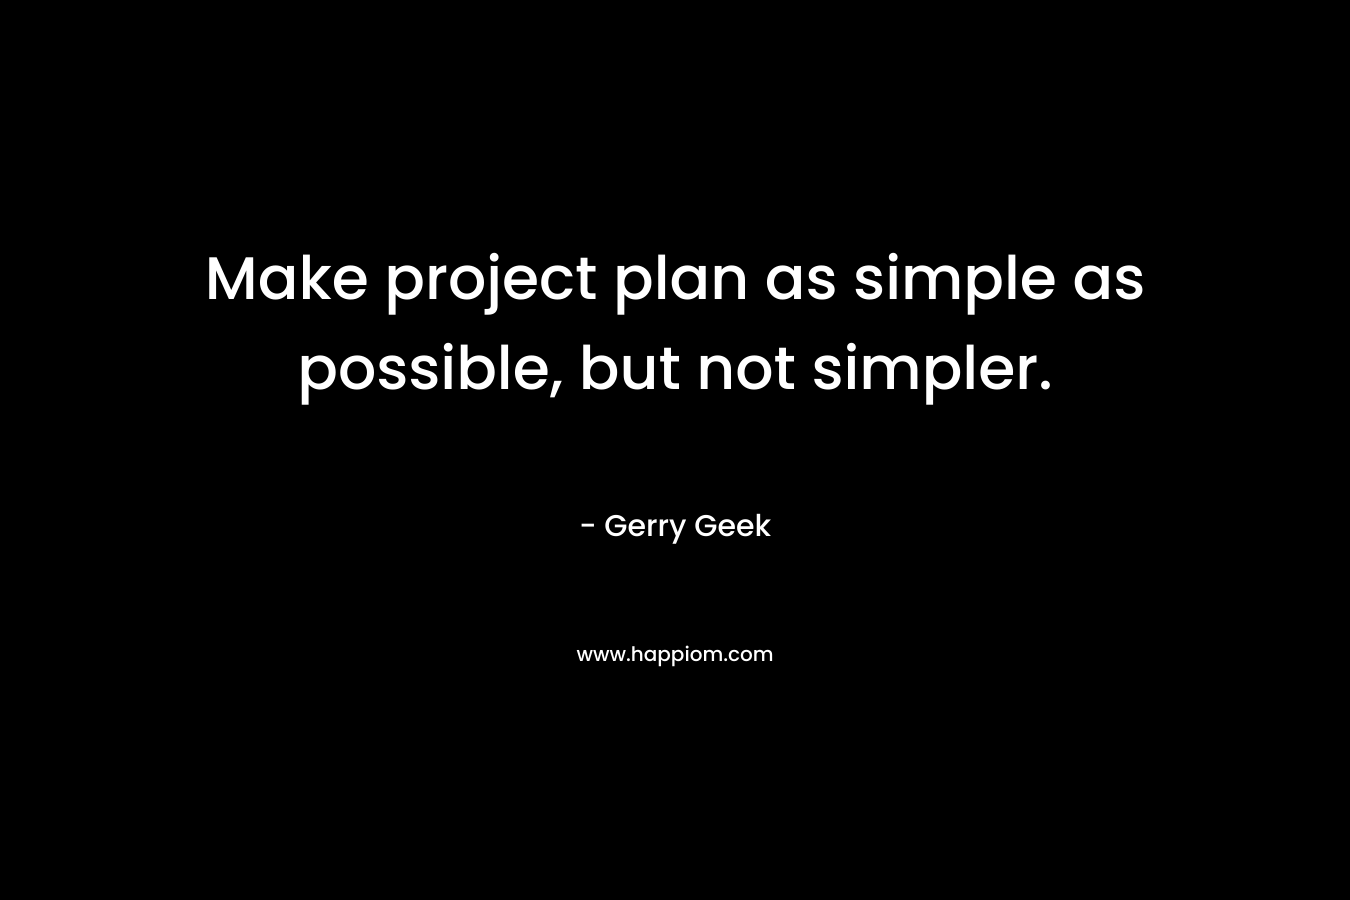 Make project plan as simple as possible, but not simpler. – Gerry Geek